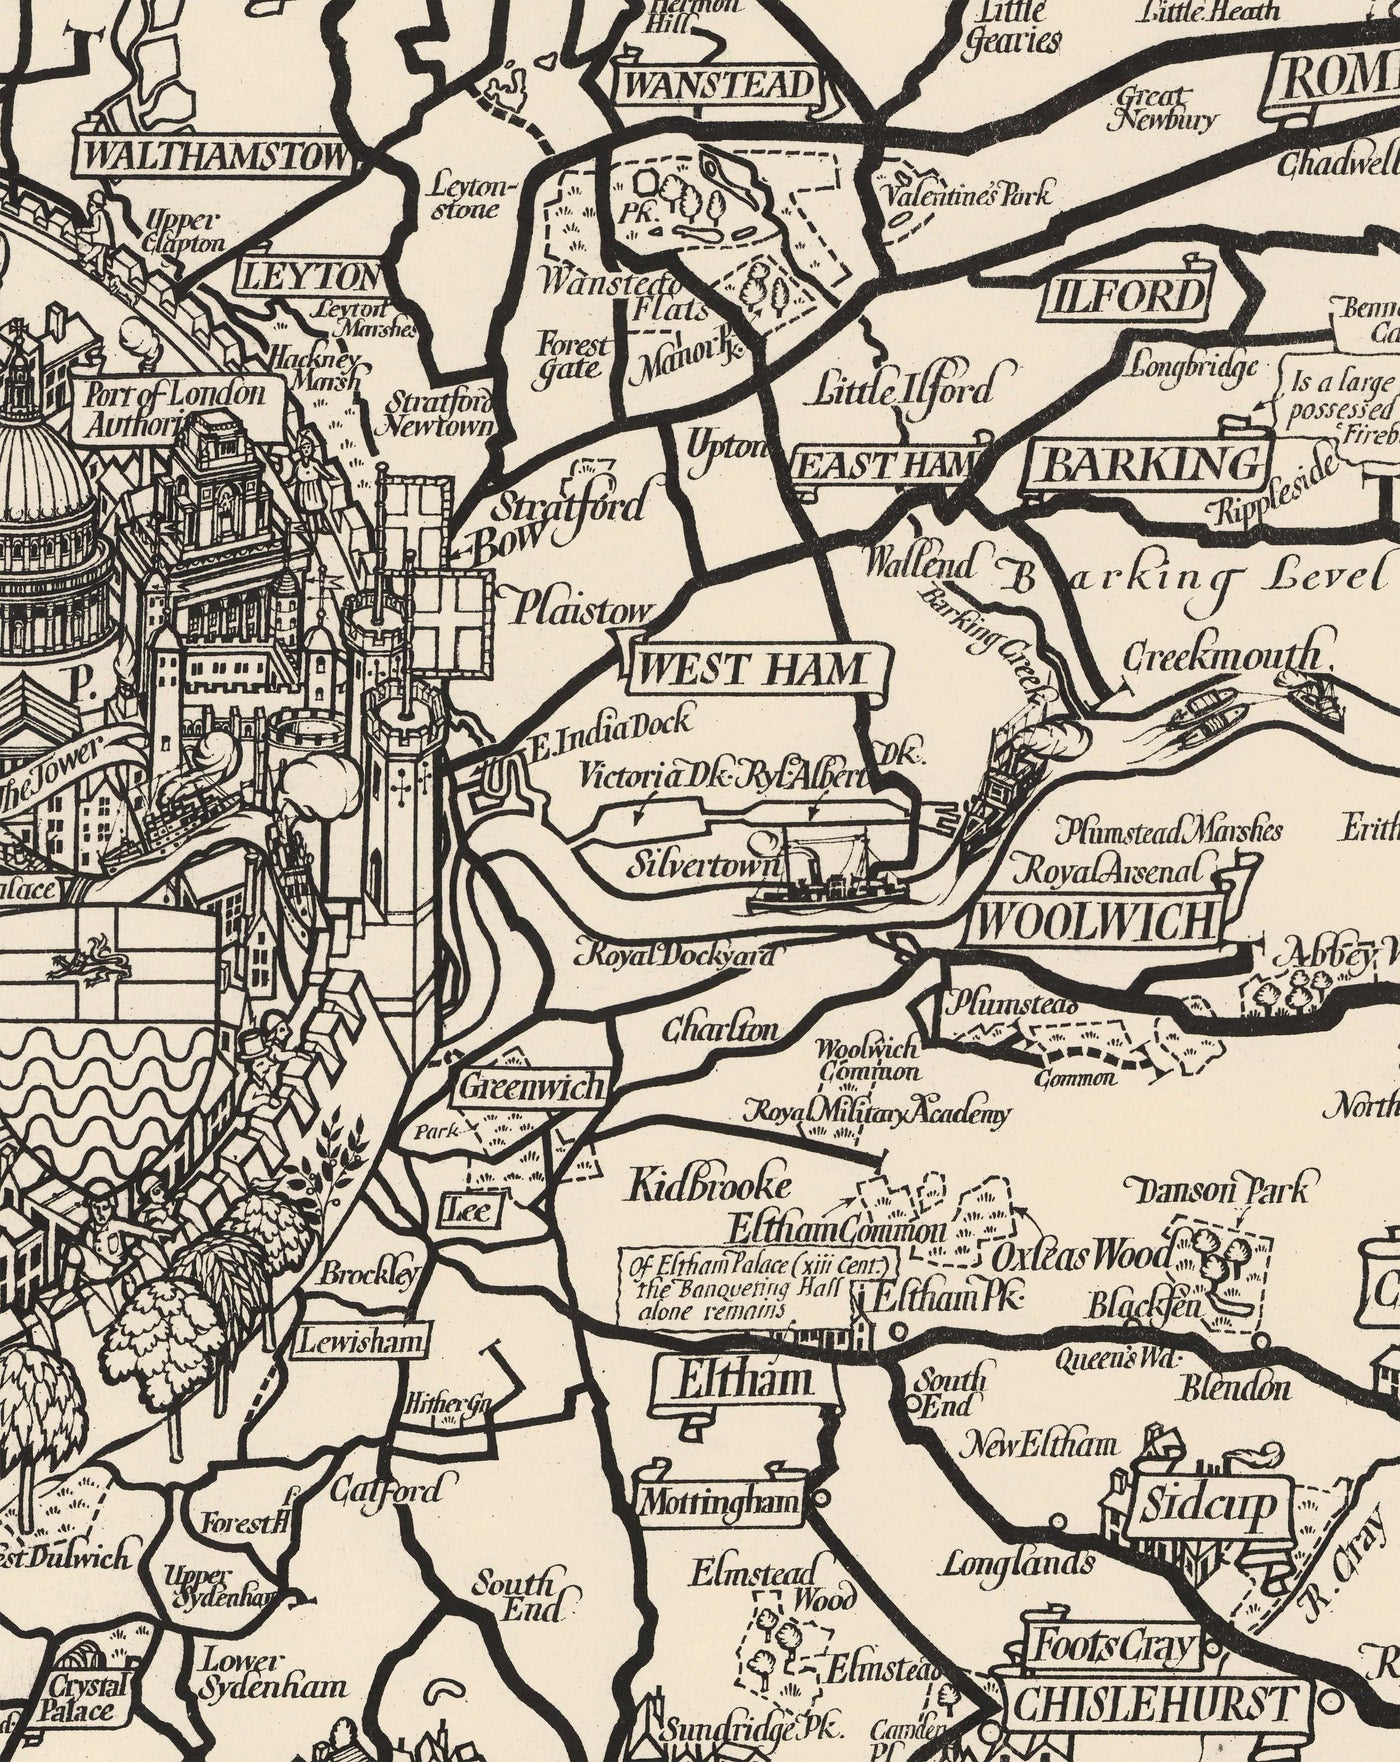 Old Monochrome Map of London, Suburbs & Commuter Belt by Max Gill in 1928 - "Far flung are our bus routes"